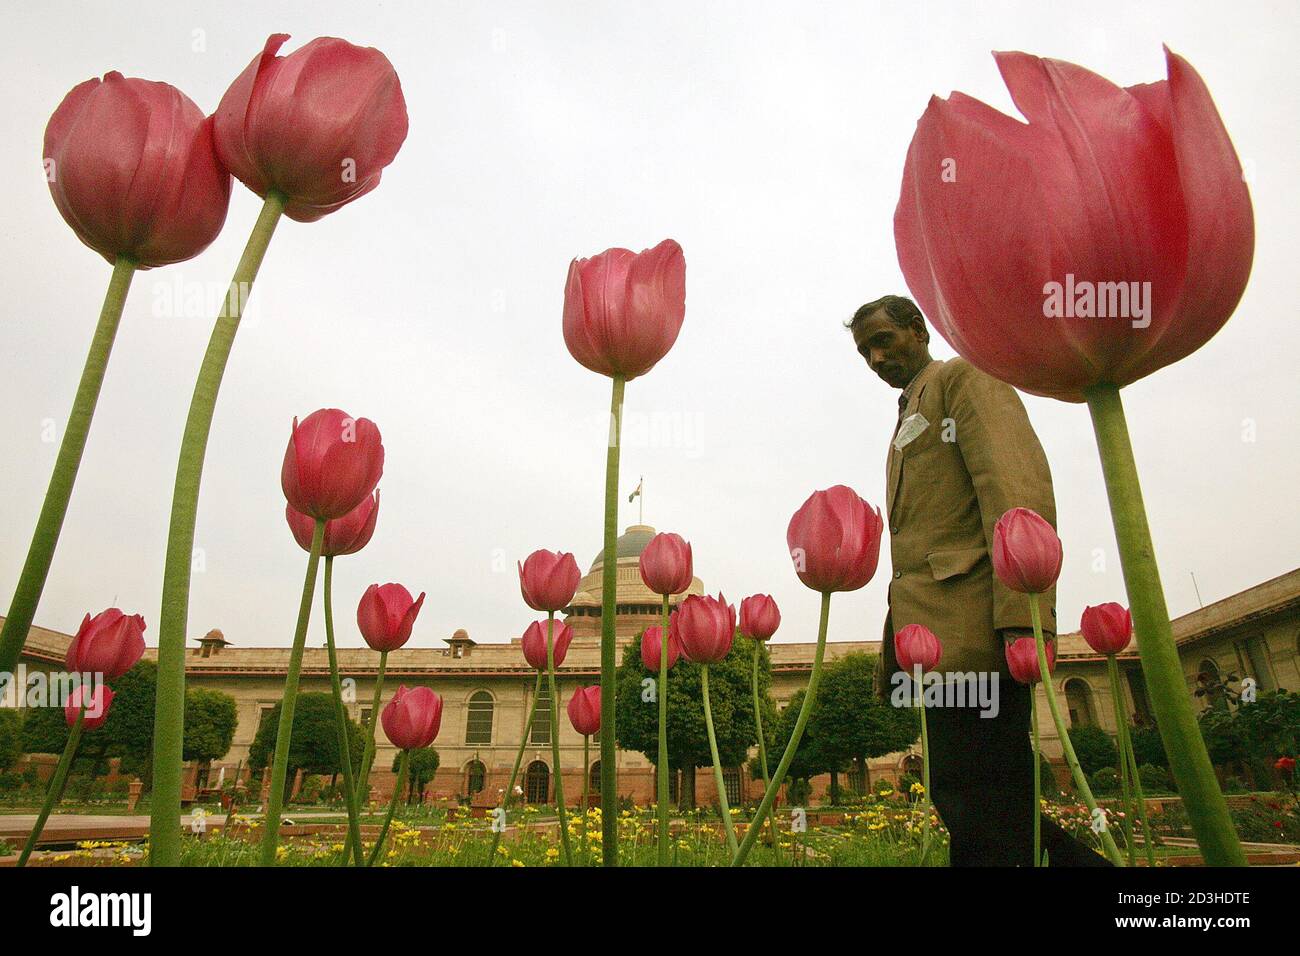 A gardener walks past tulips inside the India's famous Mughal Garden during a press preview inside President House compound in New Delhi February 9, 2005. The gardens, created by British designer Sir Edward Lutyens and inspired by the beautiful gardens of Kashmir, were unveiled to the media on Wednesday ahead of its public opening. REUTERS/Kamal Kishore  AH/LA Stock Photo